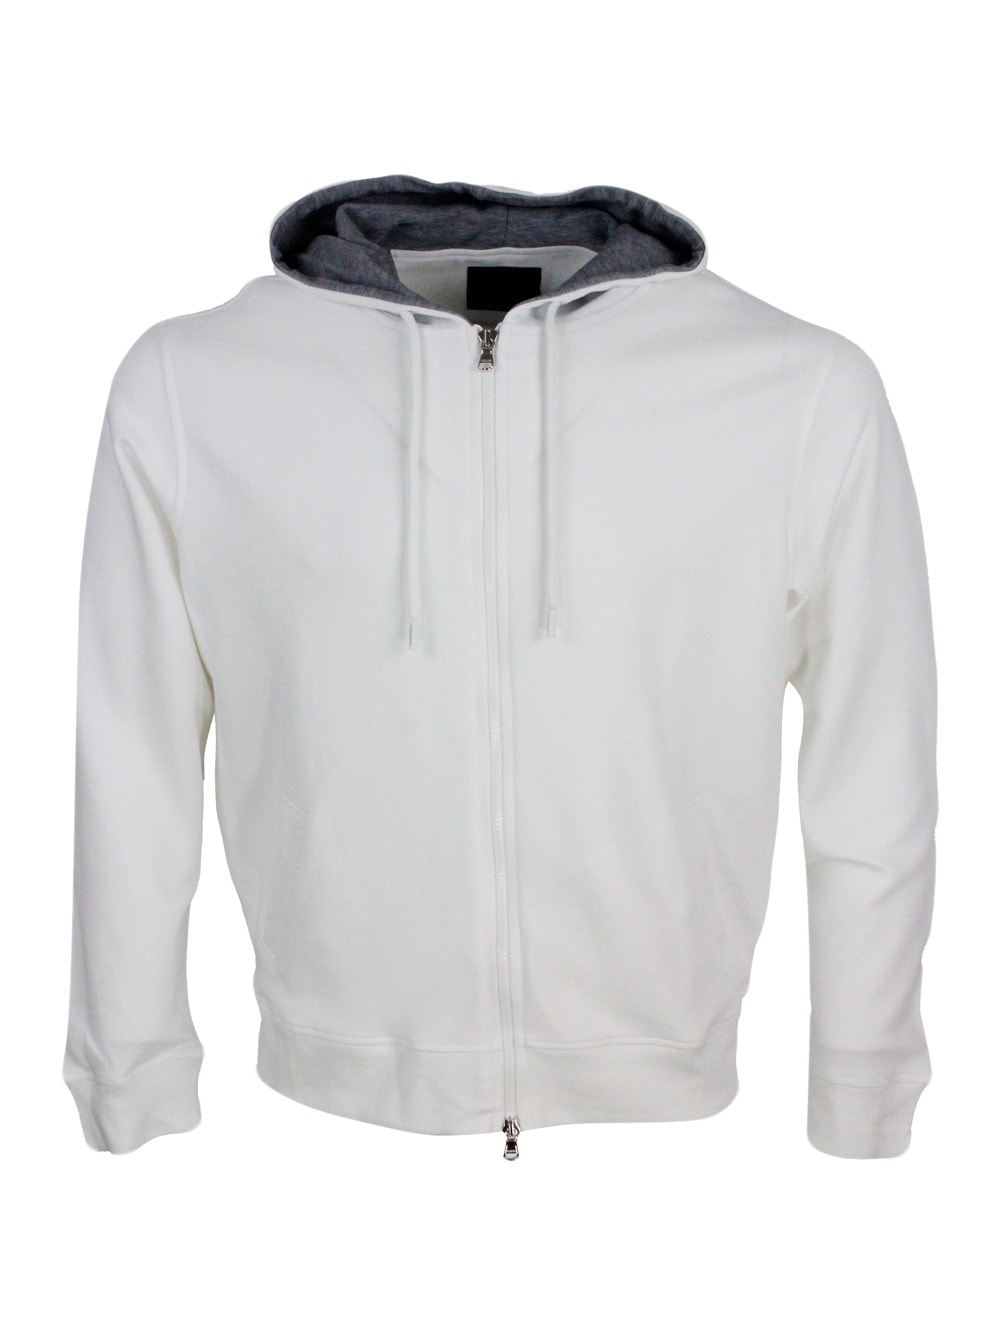 Barba Napoli Lightweight Stretch Cotton Sweatshirt With Hood With Contrasting Color Interior And Zip Closure In White